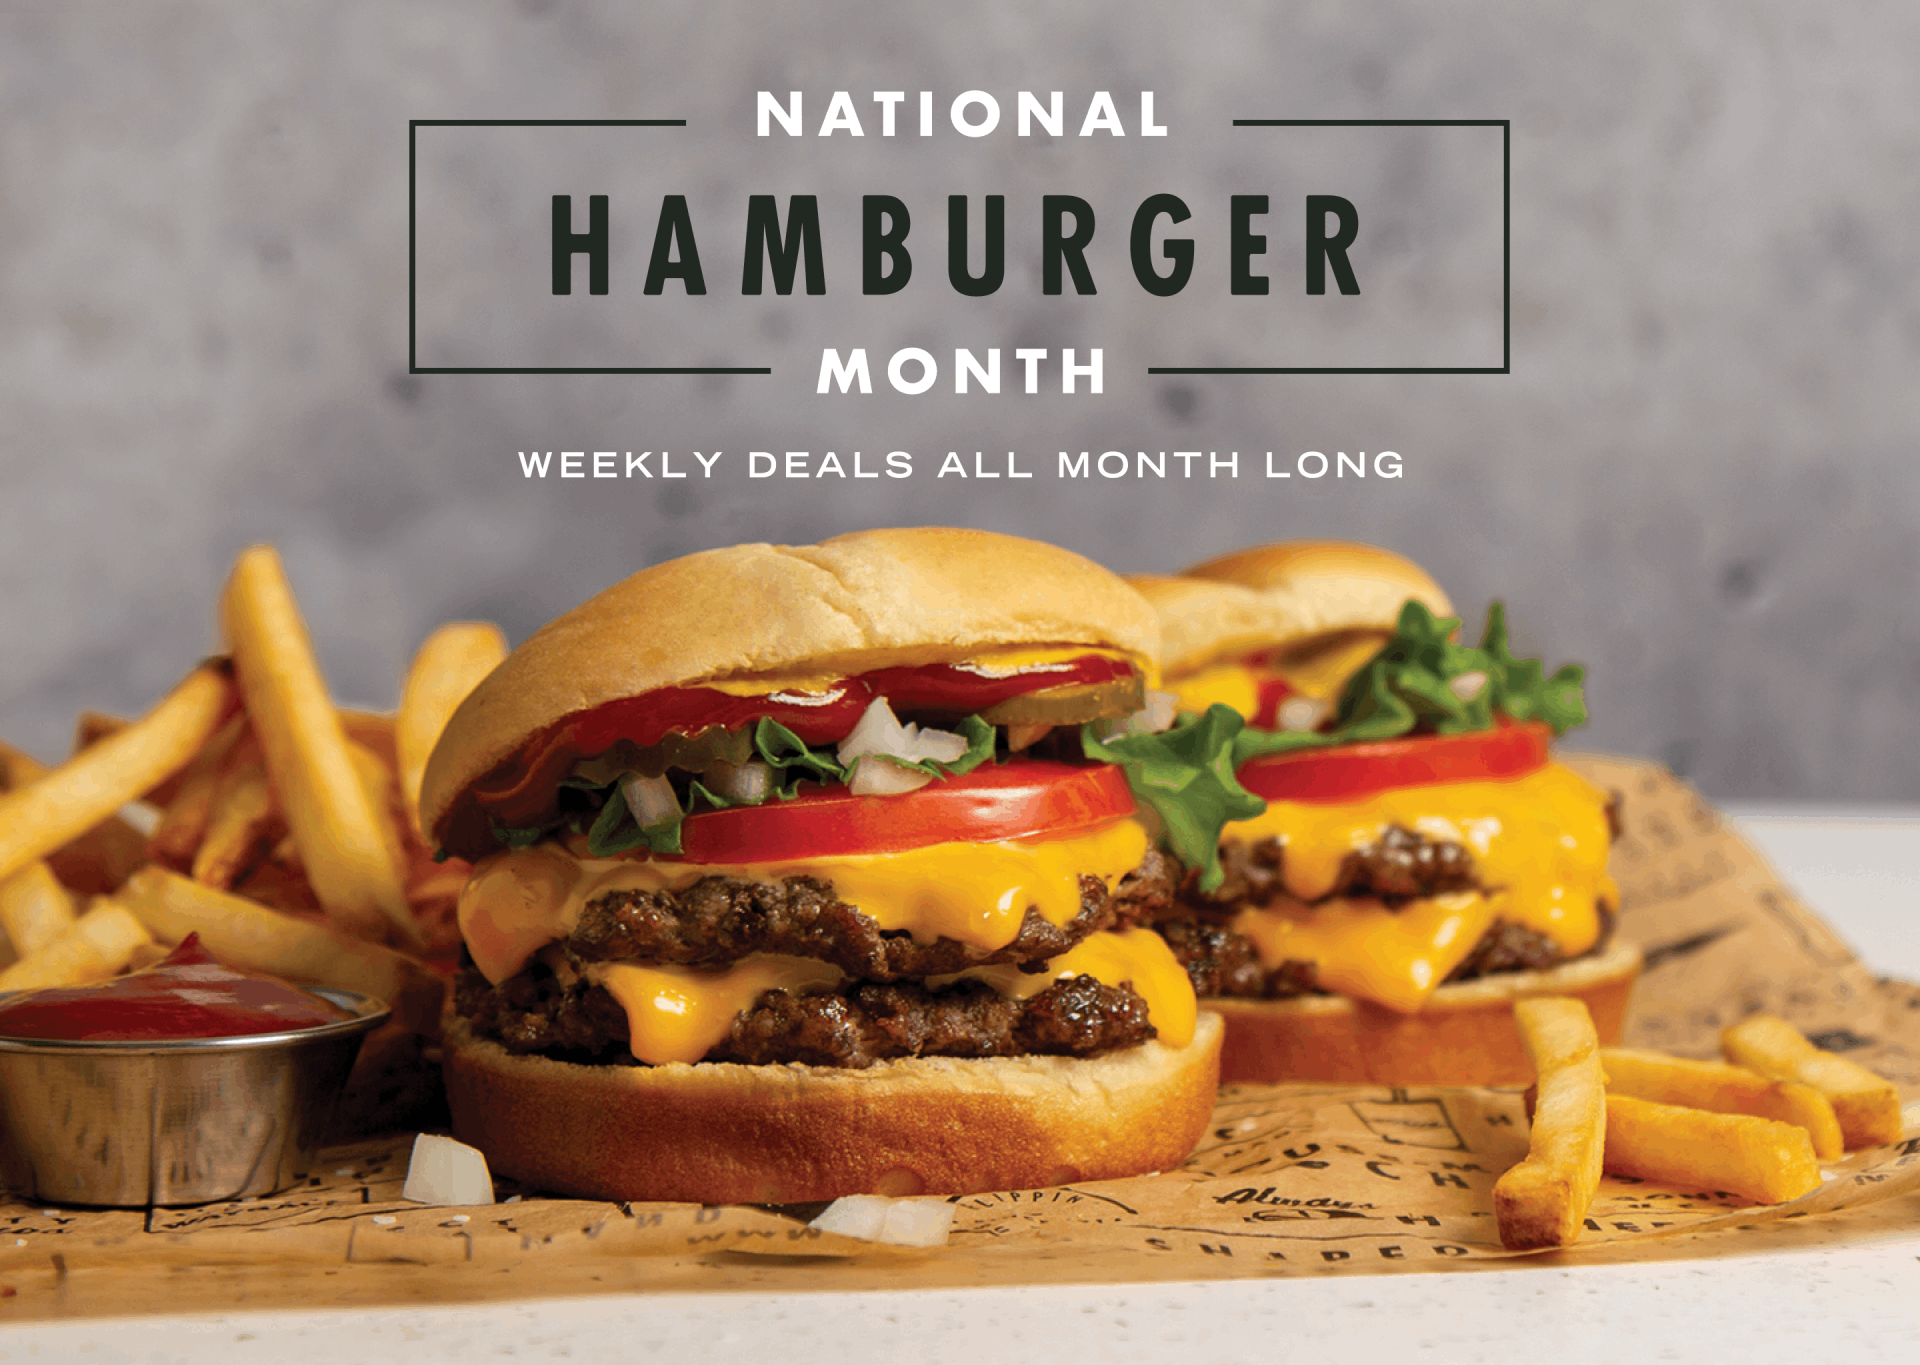 National Hamburger Month. Weekly Deals All Month Long